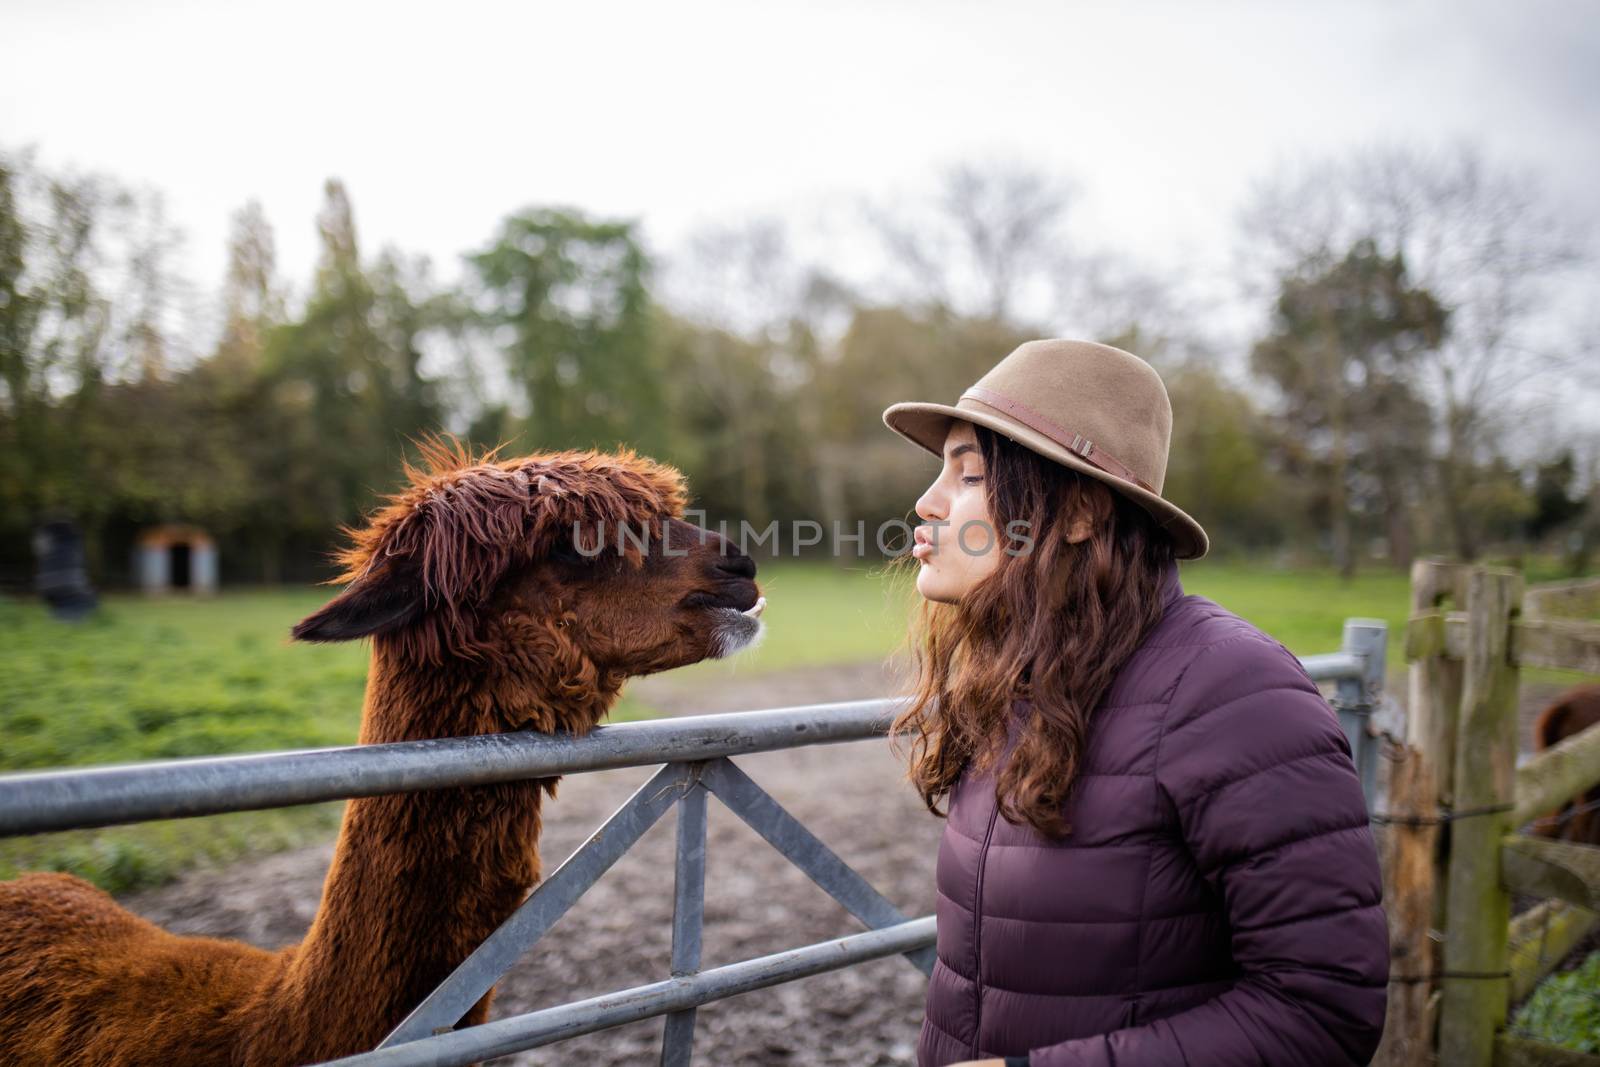 Brunette woman wearing a hat pretending to kiss a brown alpaca behind a metal and wood fence at a farmyard, with a forest as background